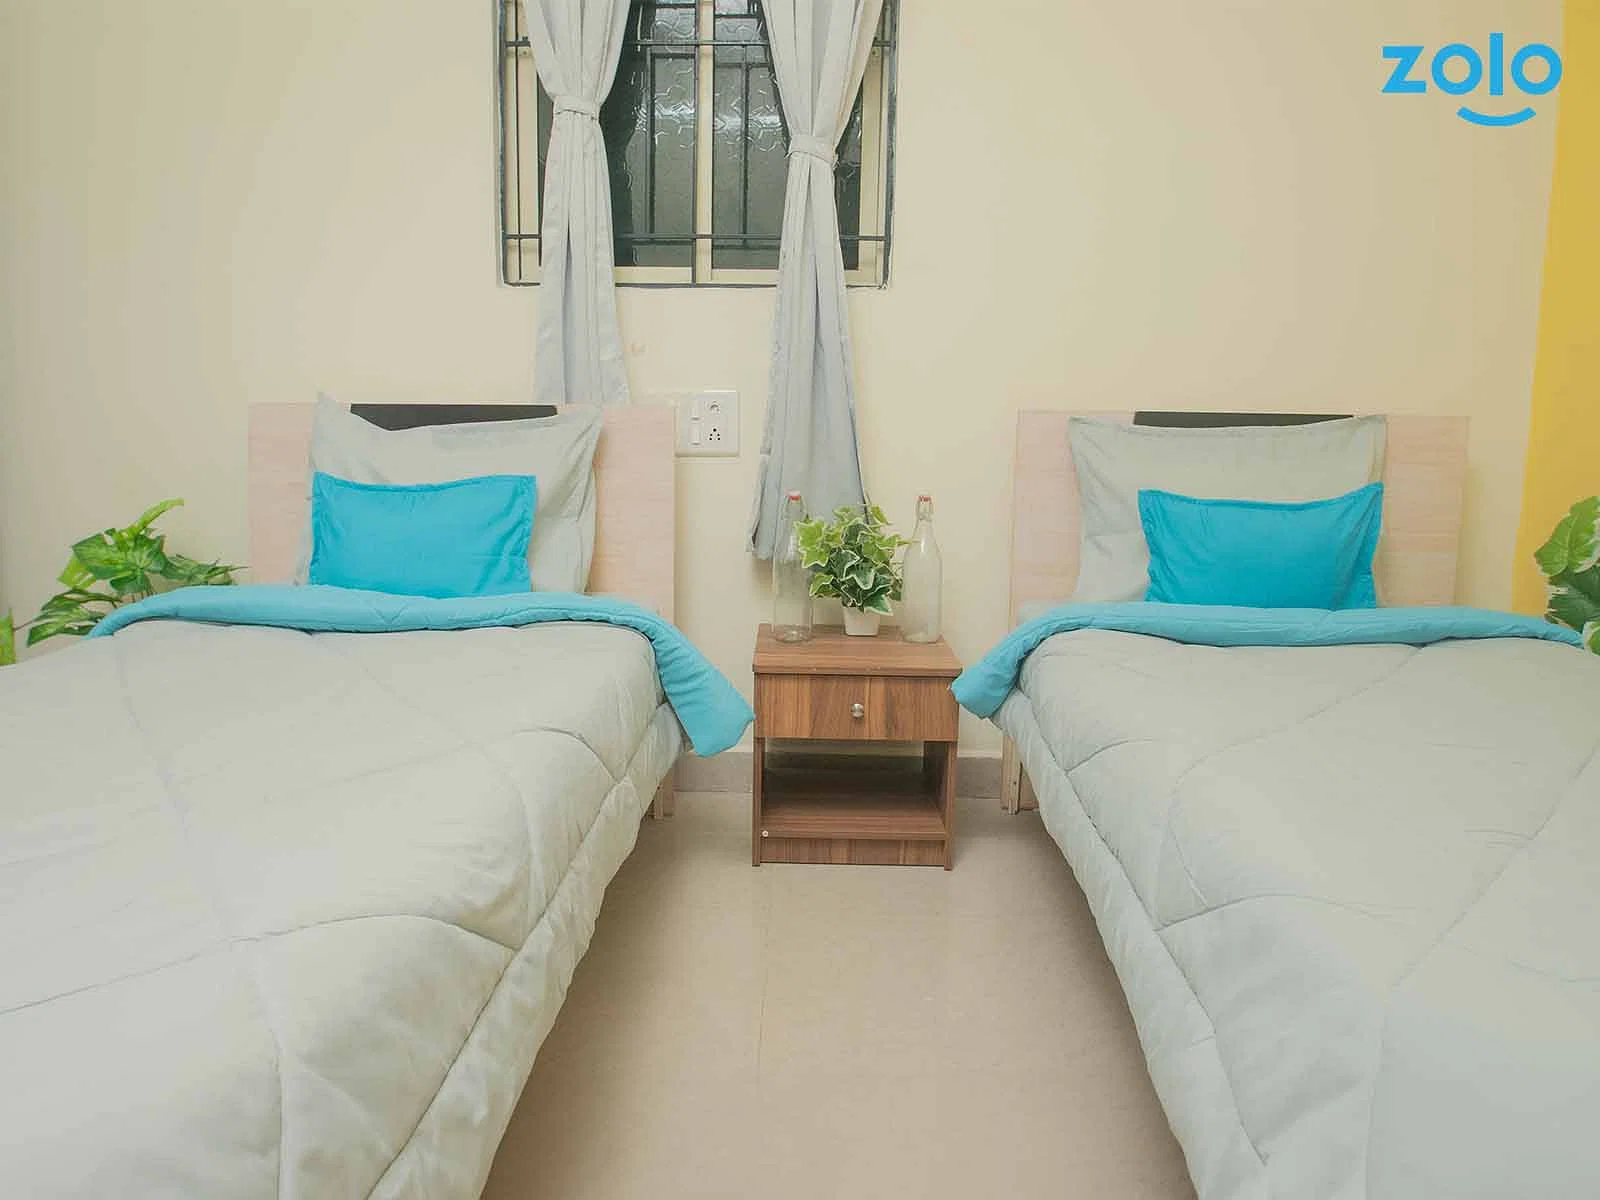 safe and affordable hostels for couple students with 24/7 security and CCTV surveillance-Zolo Anise